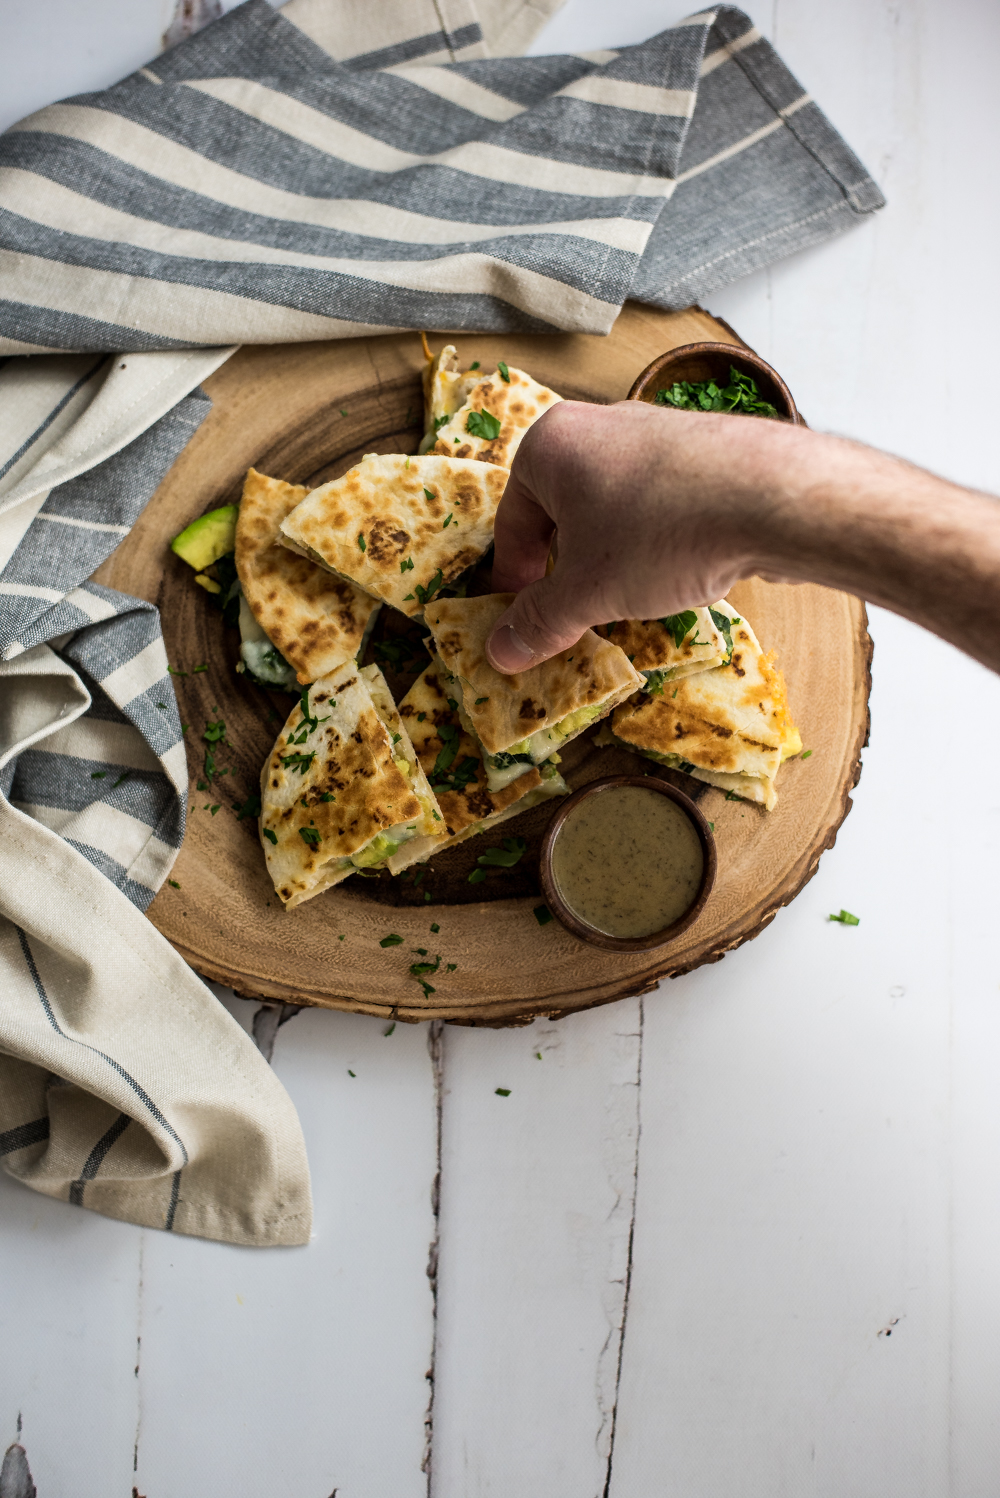 Mini Spinach and Shrimp Quesadillas with Avocado are the perfect after school, after work, or late night snack! They are super simple, quick, and delicious!